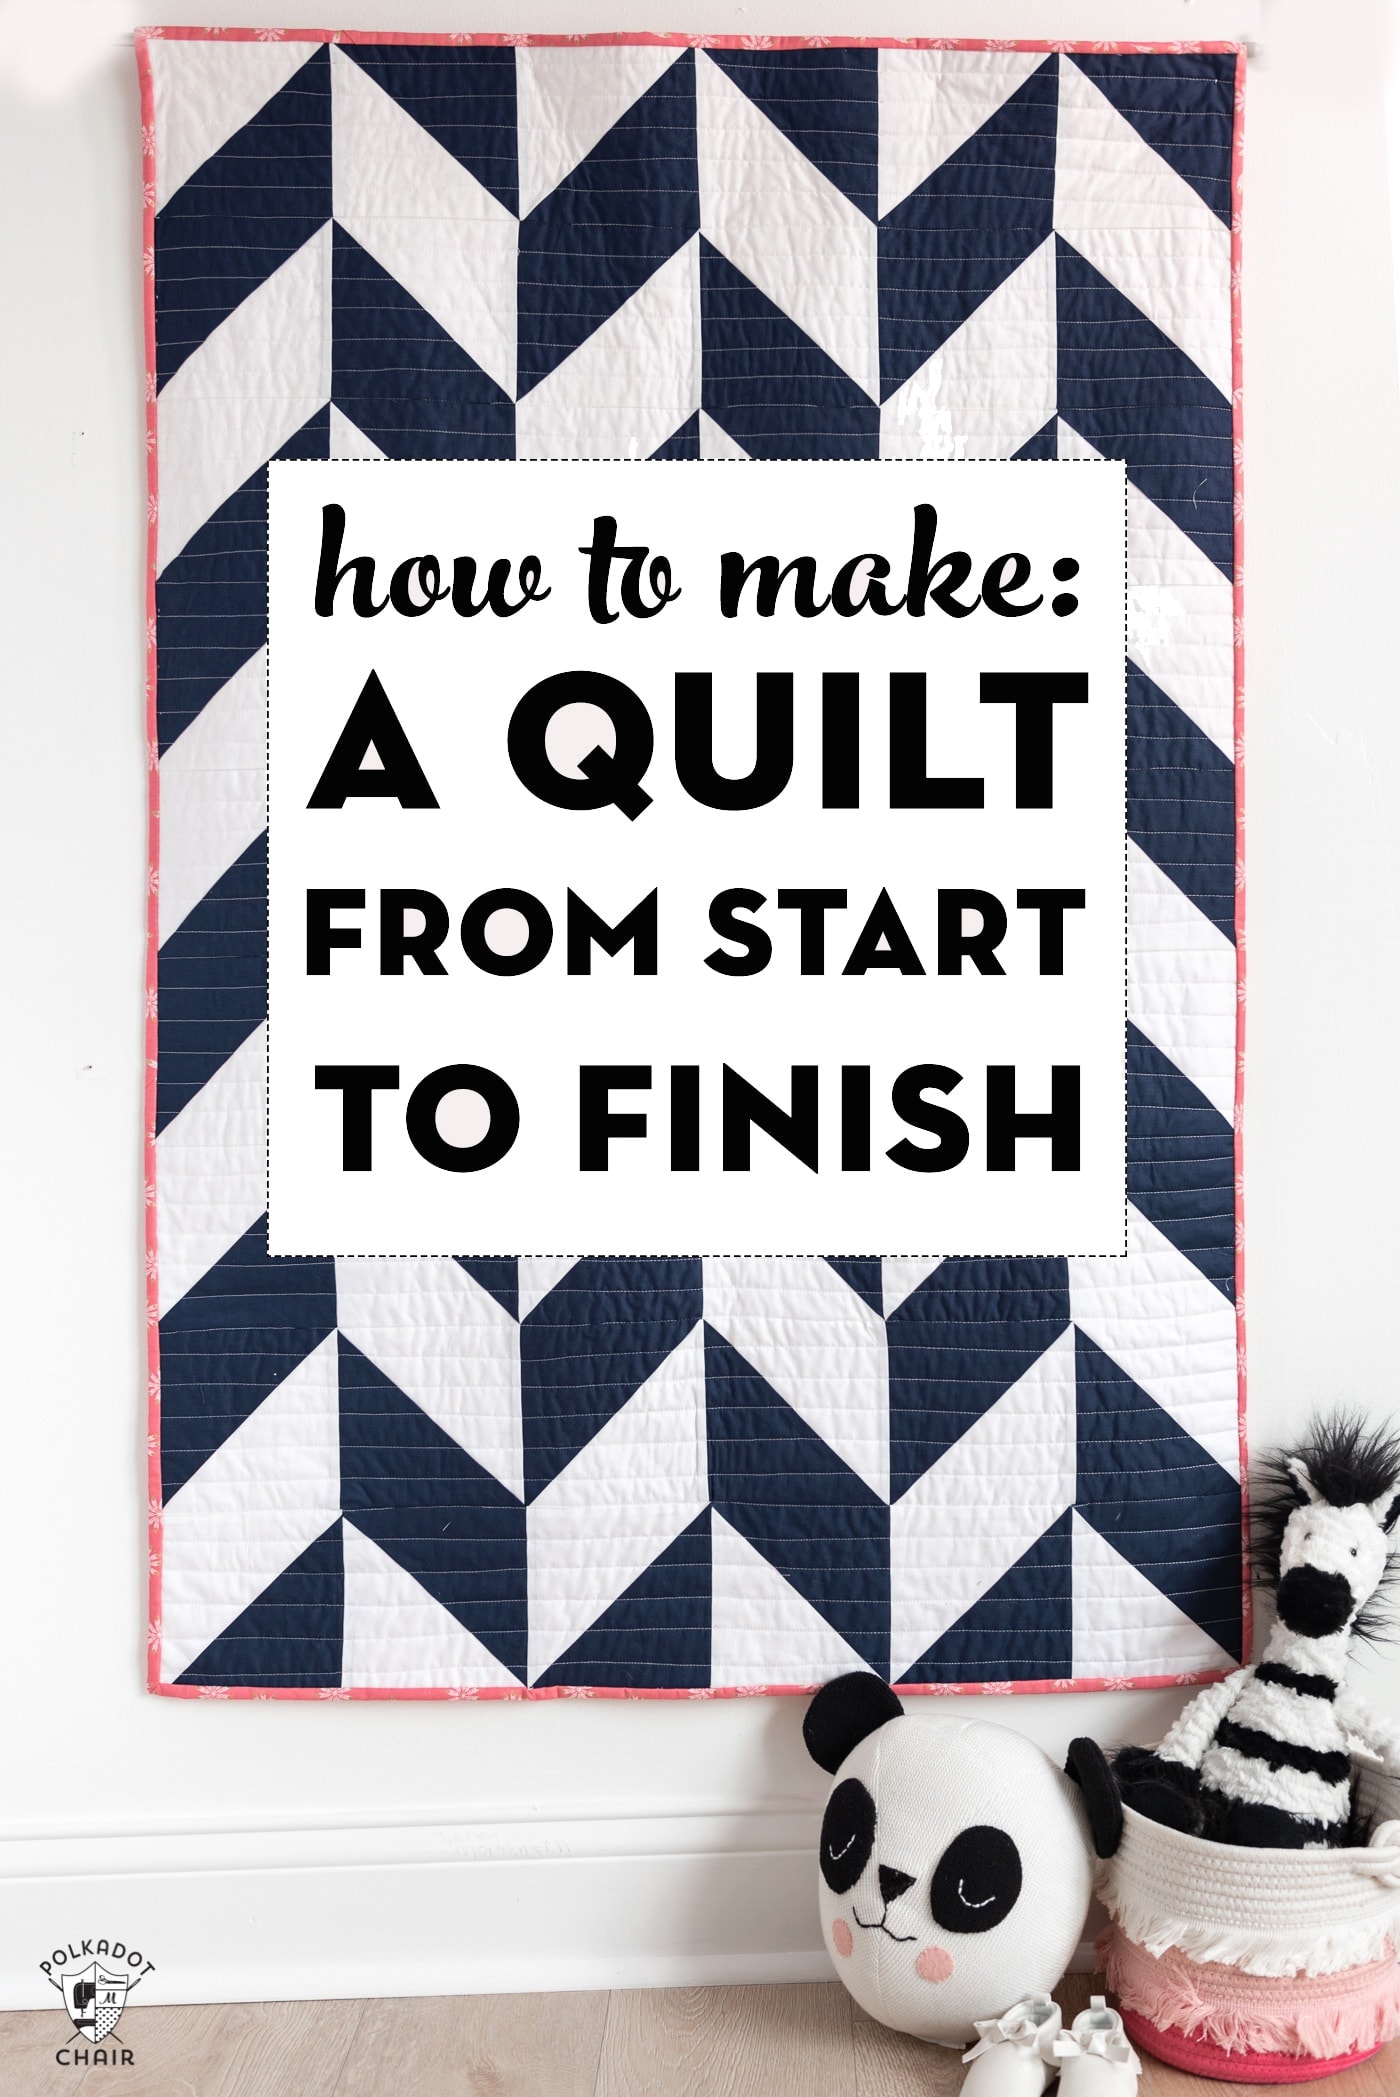 How to Make a Quilt from Start to Finish